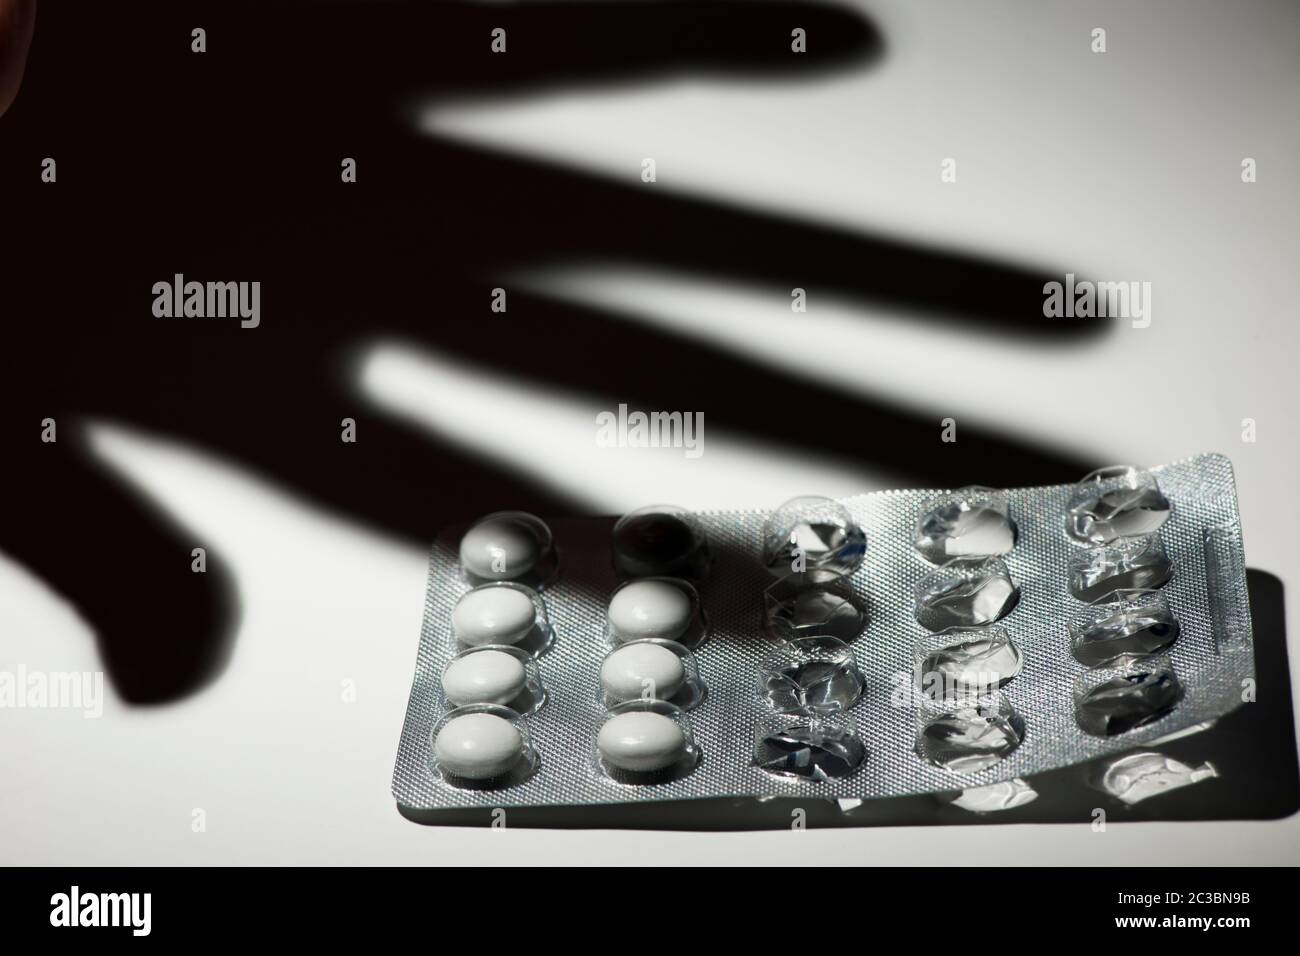 Started pack of tablets with shadow of a hand on white background in monochrome appearance. Stock Photo